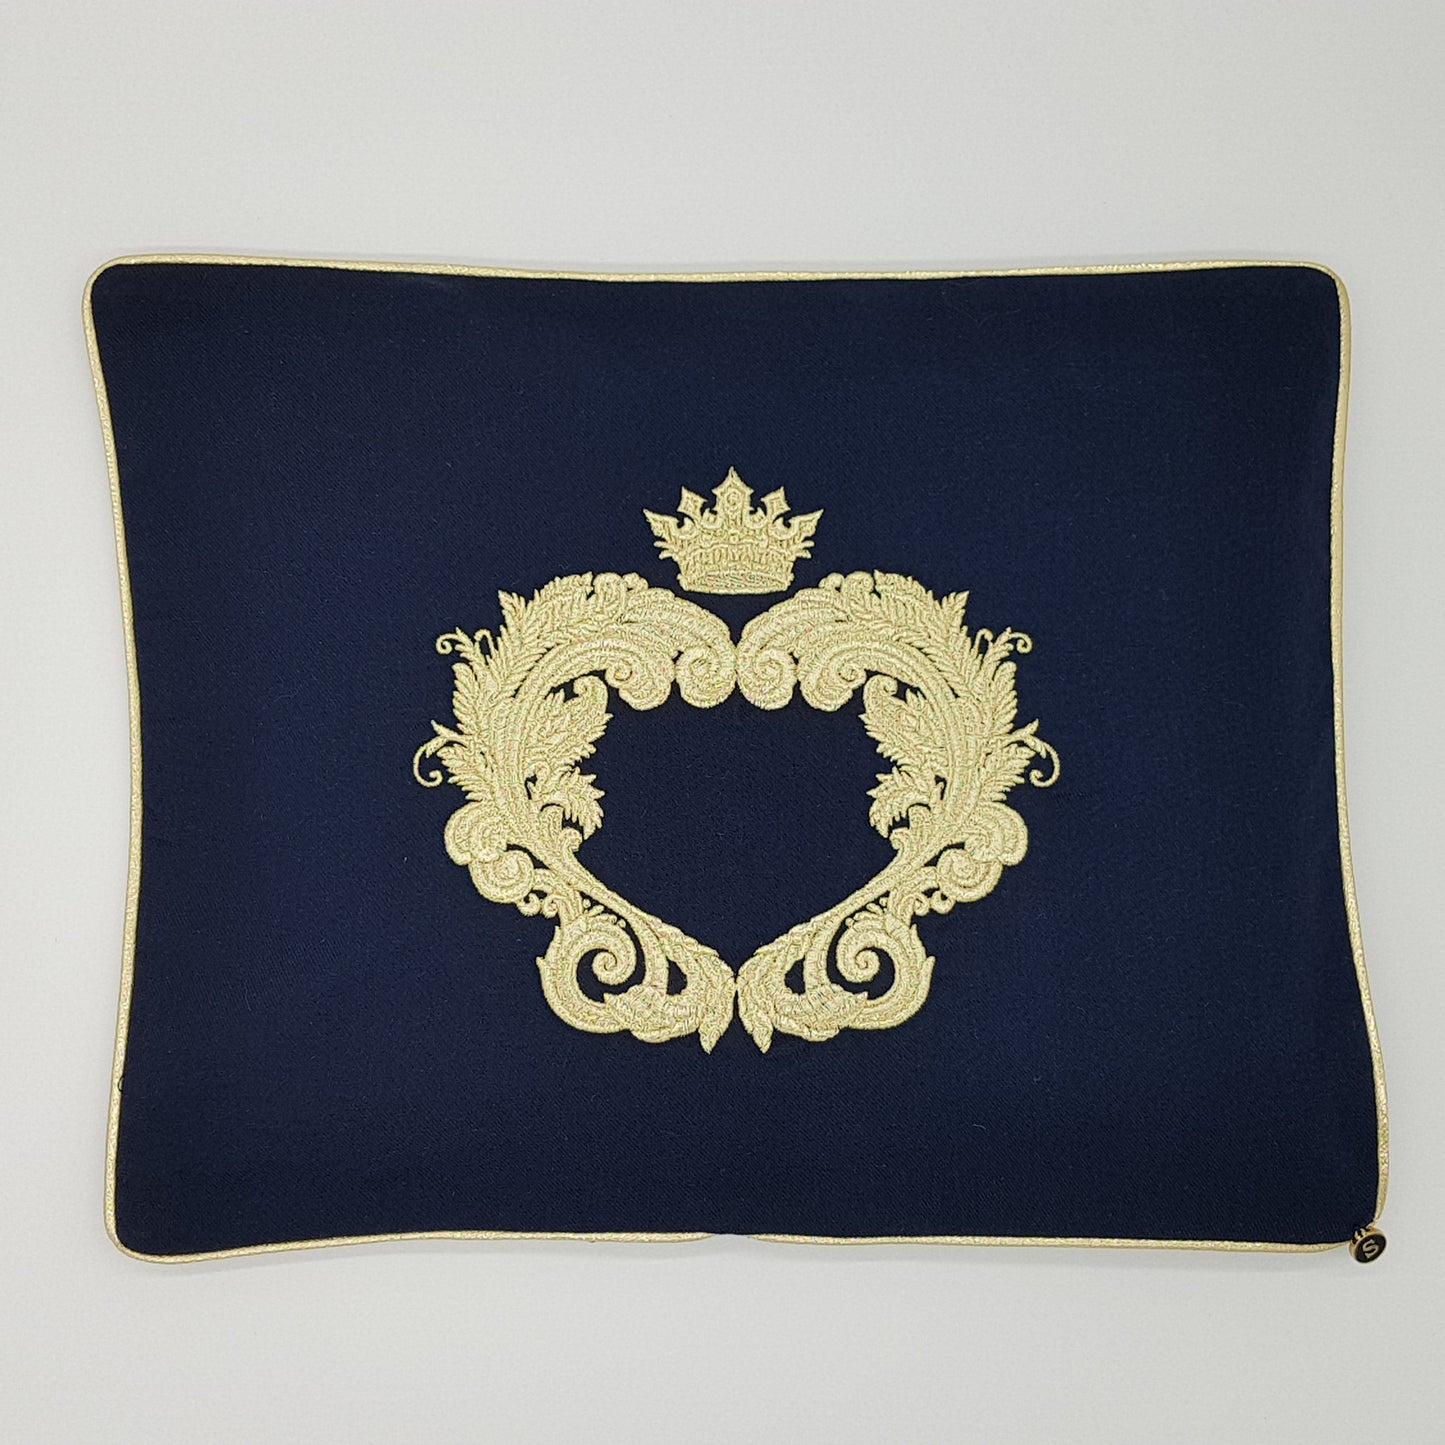 Limited Edition Baby Wrap & Pillowcase Set, Gold on Navy Cotton Blend